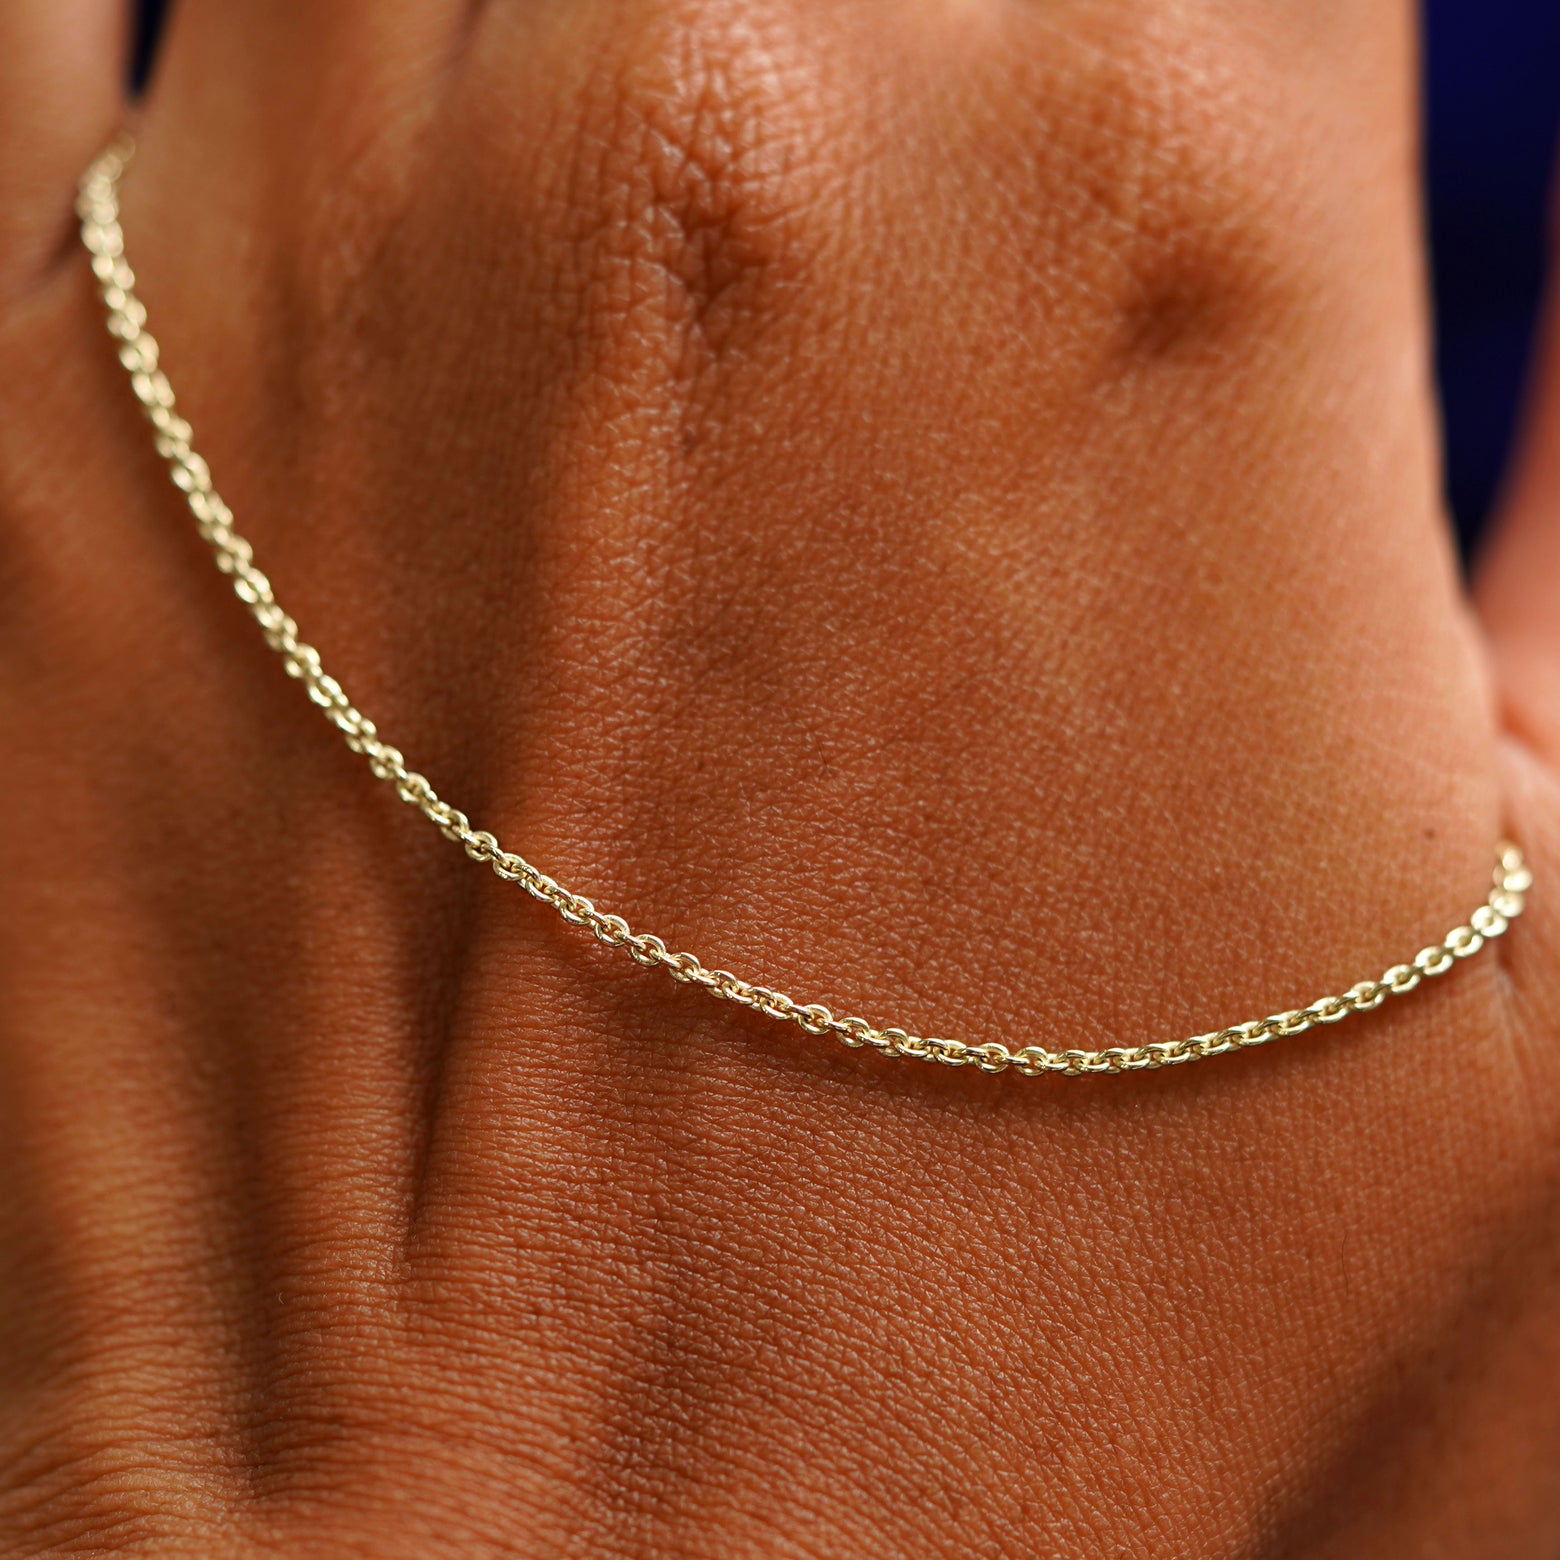 A solid gold Thick Cable Bracelet resting on the back of a model's hand